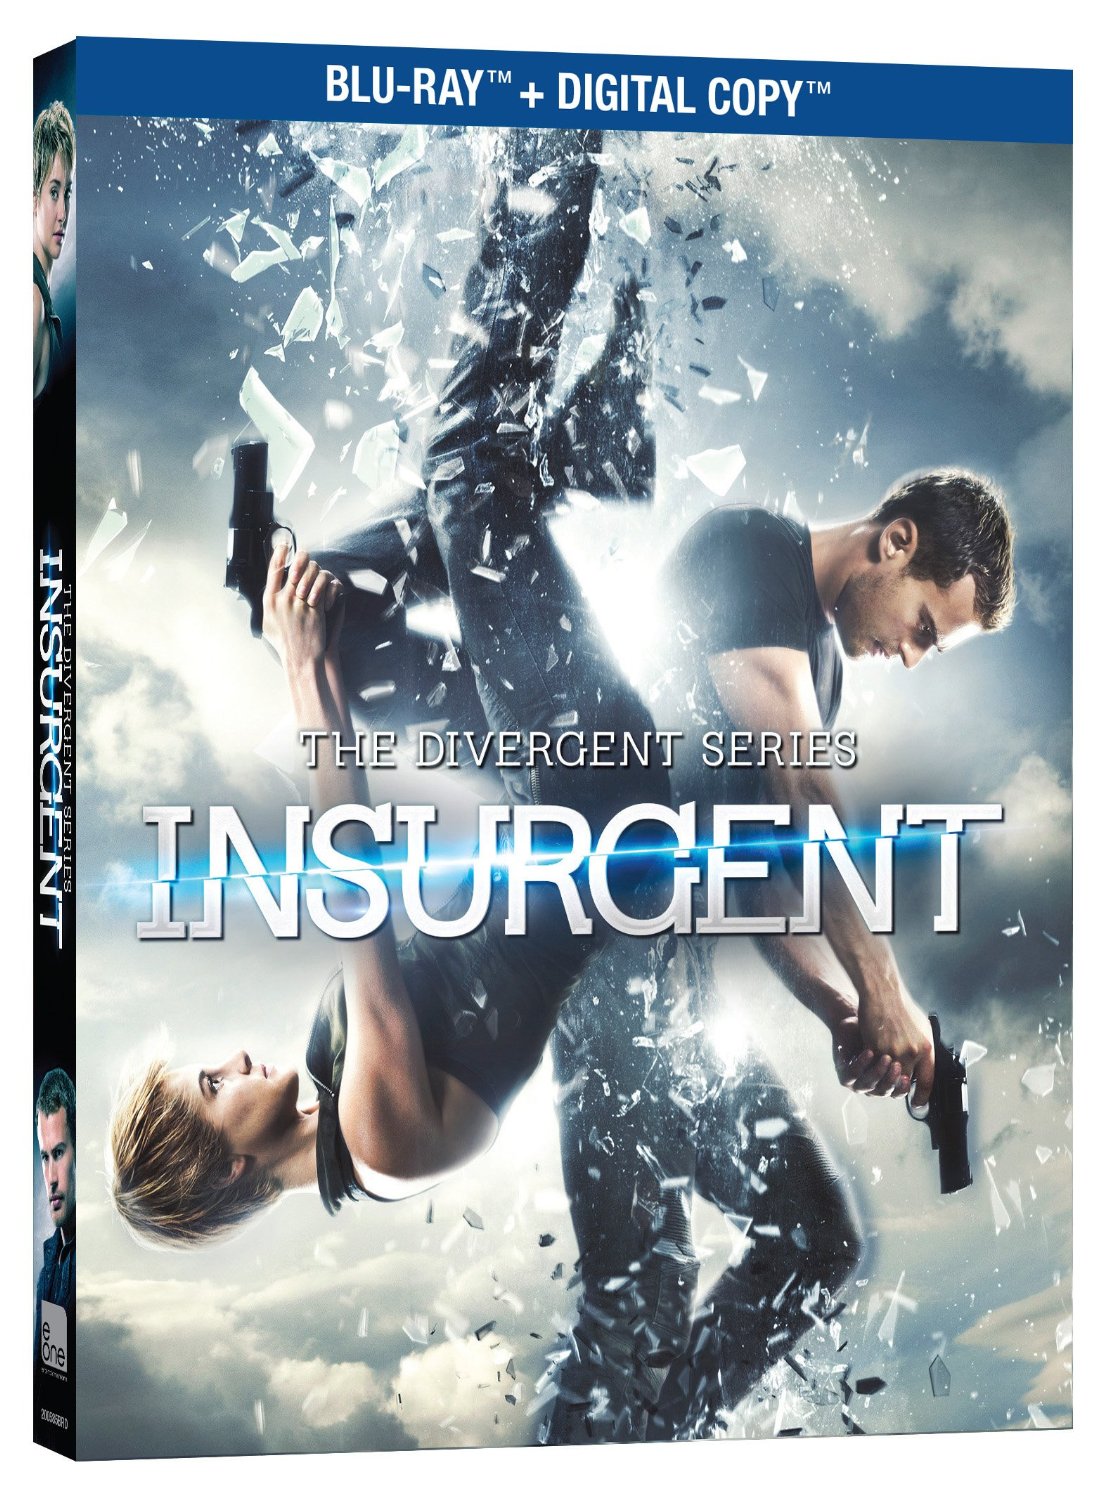 The Divergent Series: Insurgent – Blu-ray review